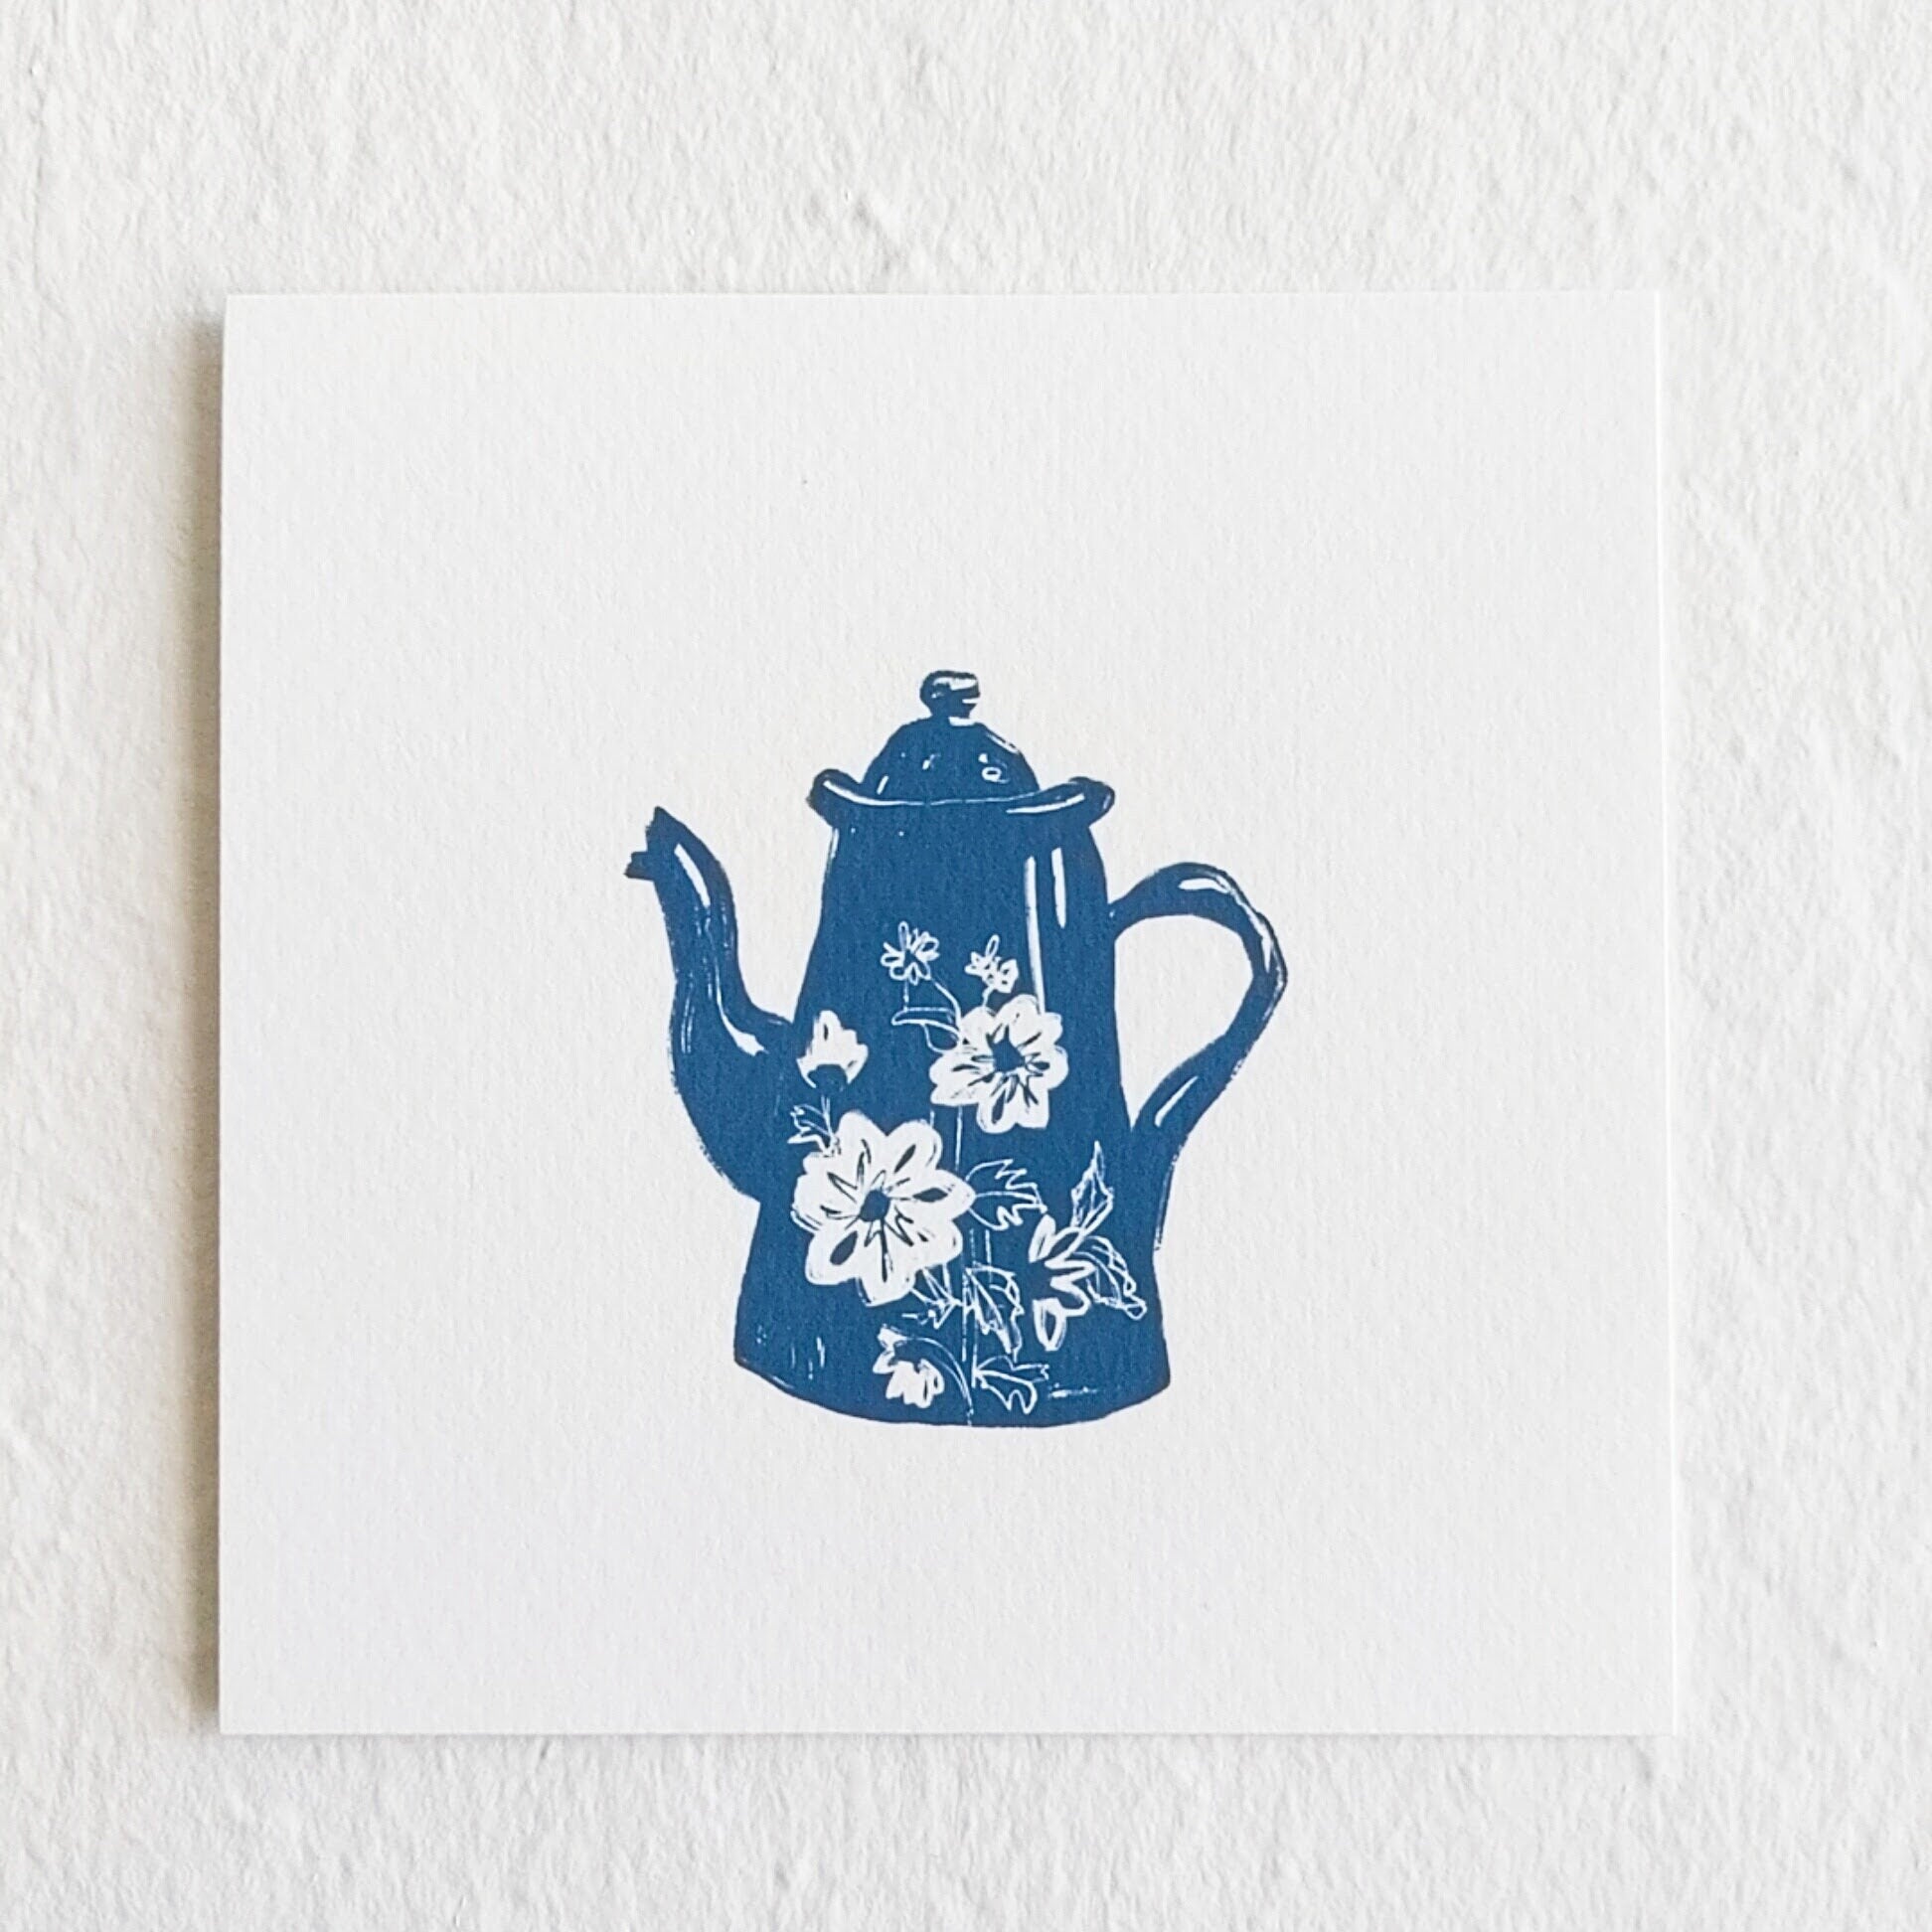 4x4 inches small wall art prints | tea time | china blue